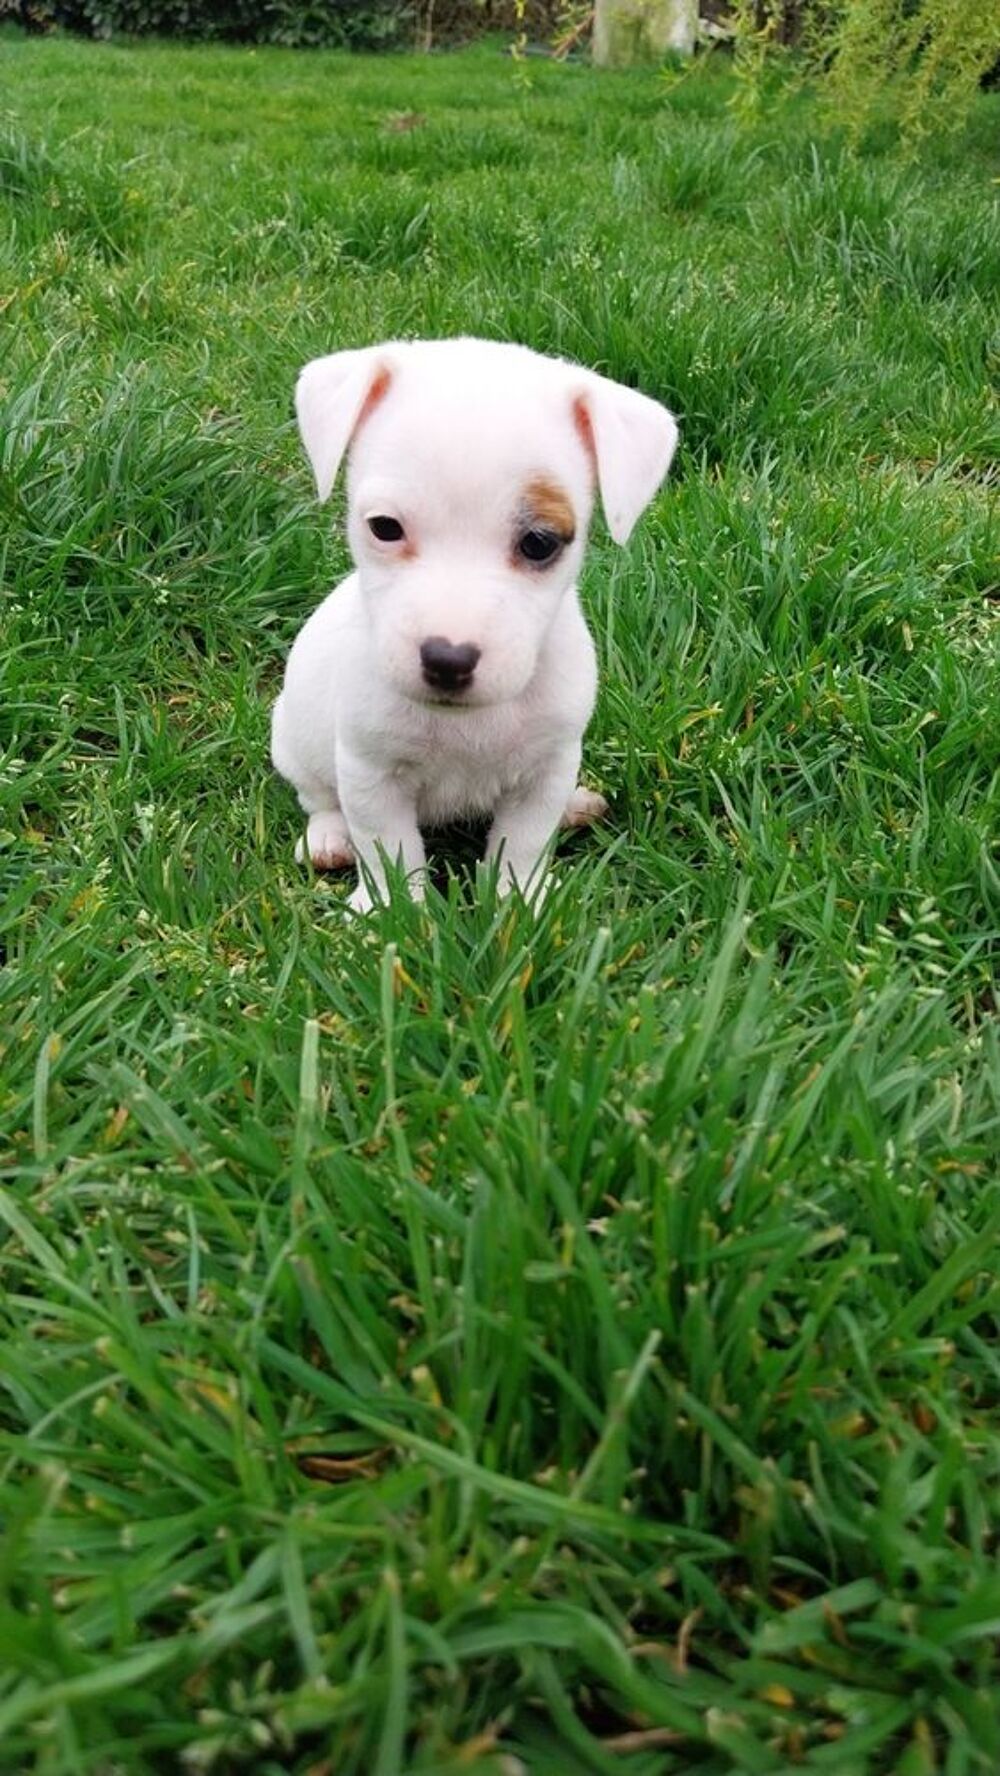   A rserv 6 chiots type Jack russel.  